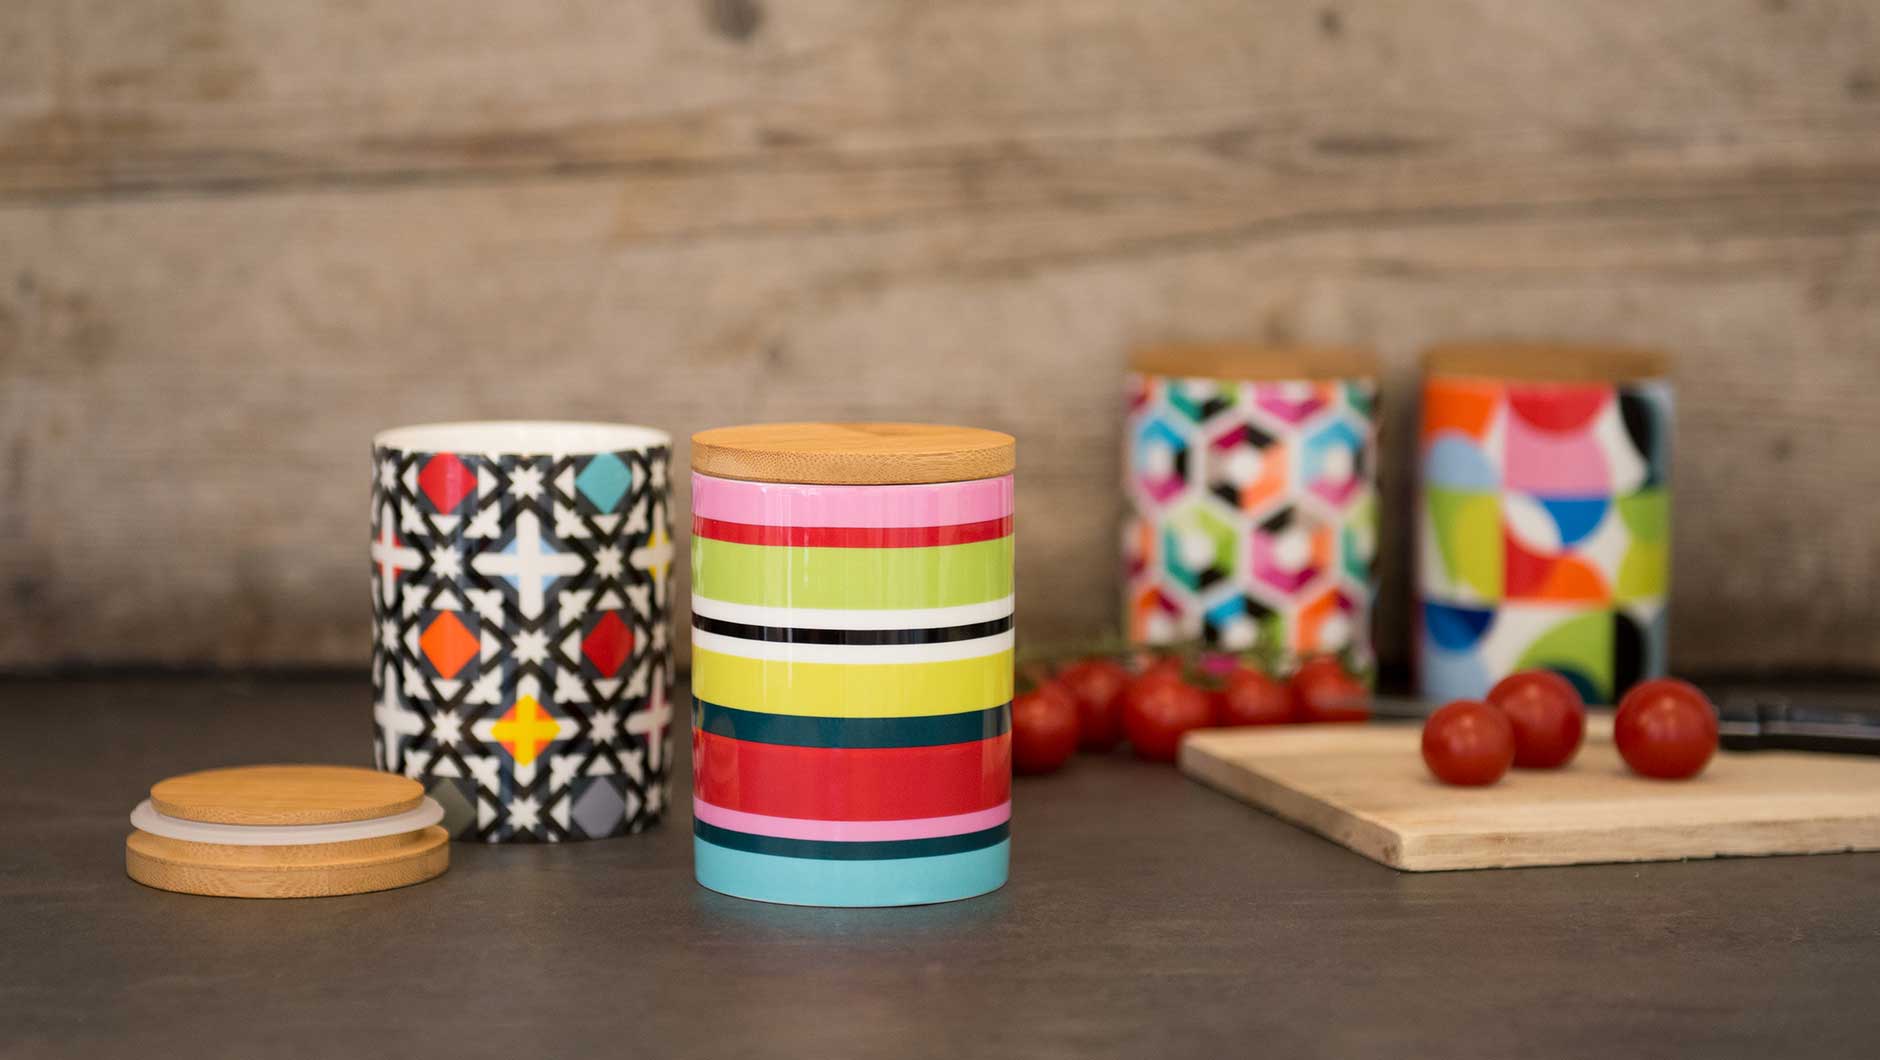 Porcelain Canister Small "Verano", KITCHENWARE, REMEMBER®, - Fabrica